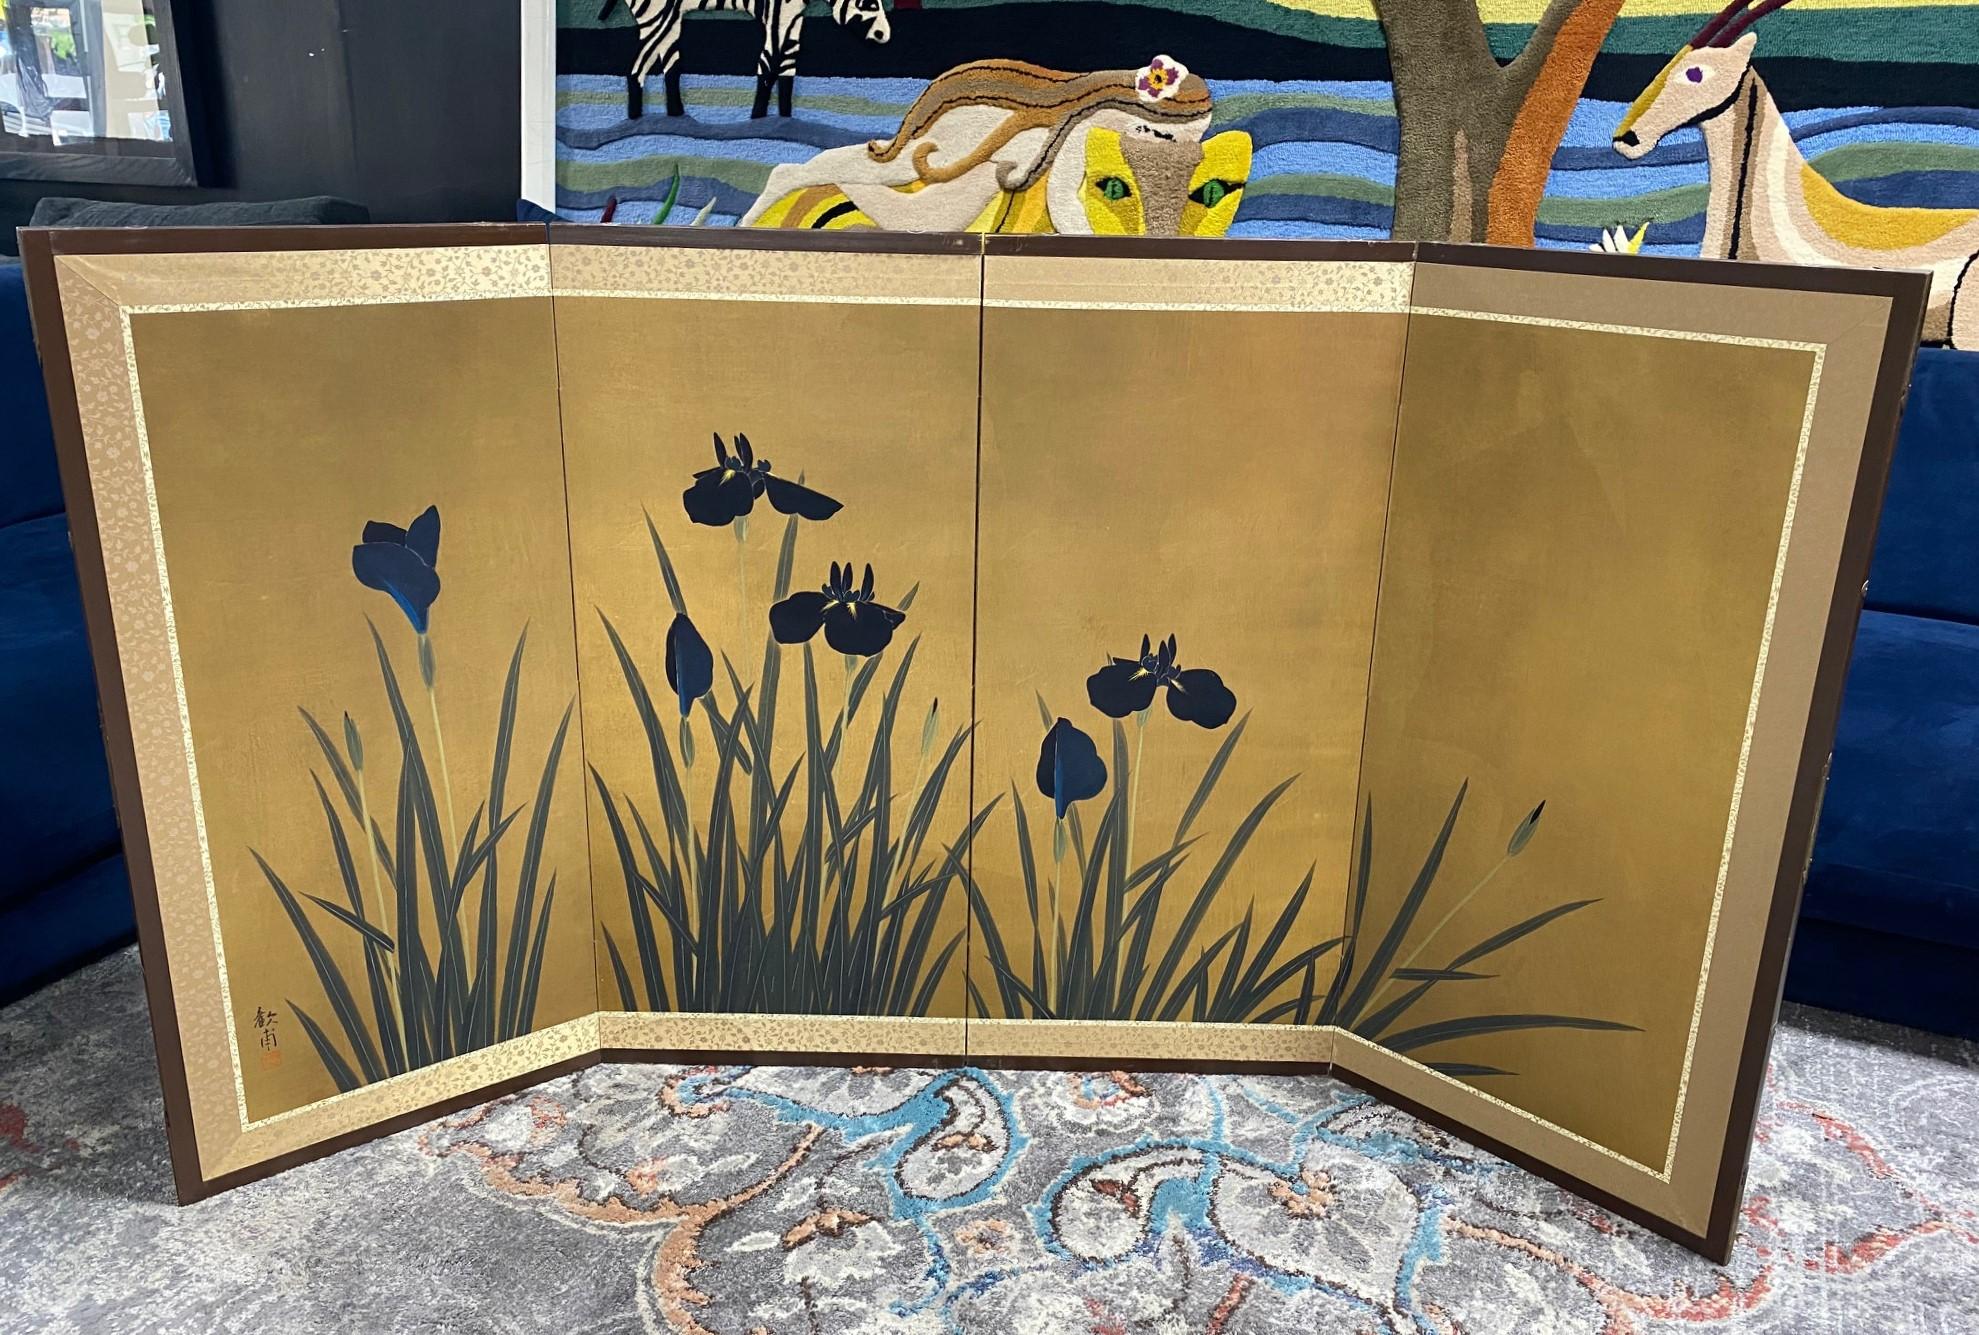 A gorgeous four-panel Japanese Byobu folding screen depicting a nature landscape scene with blossoming iris flowers - perhaps an homage to the famed Irises screens by the famed Japanese artist Ogata Korin of the Rinpa school. The bold, rich purple